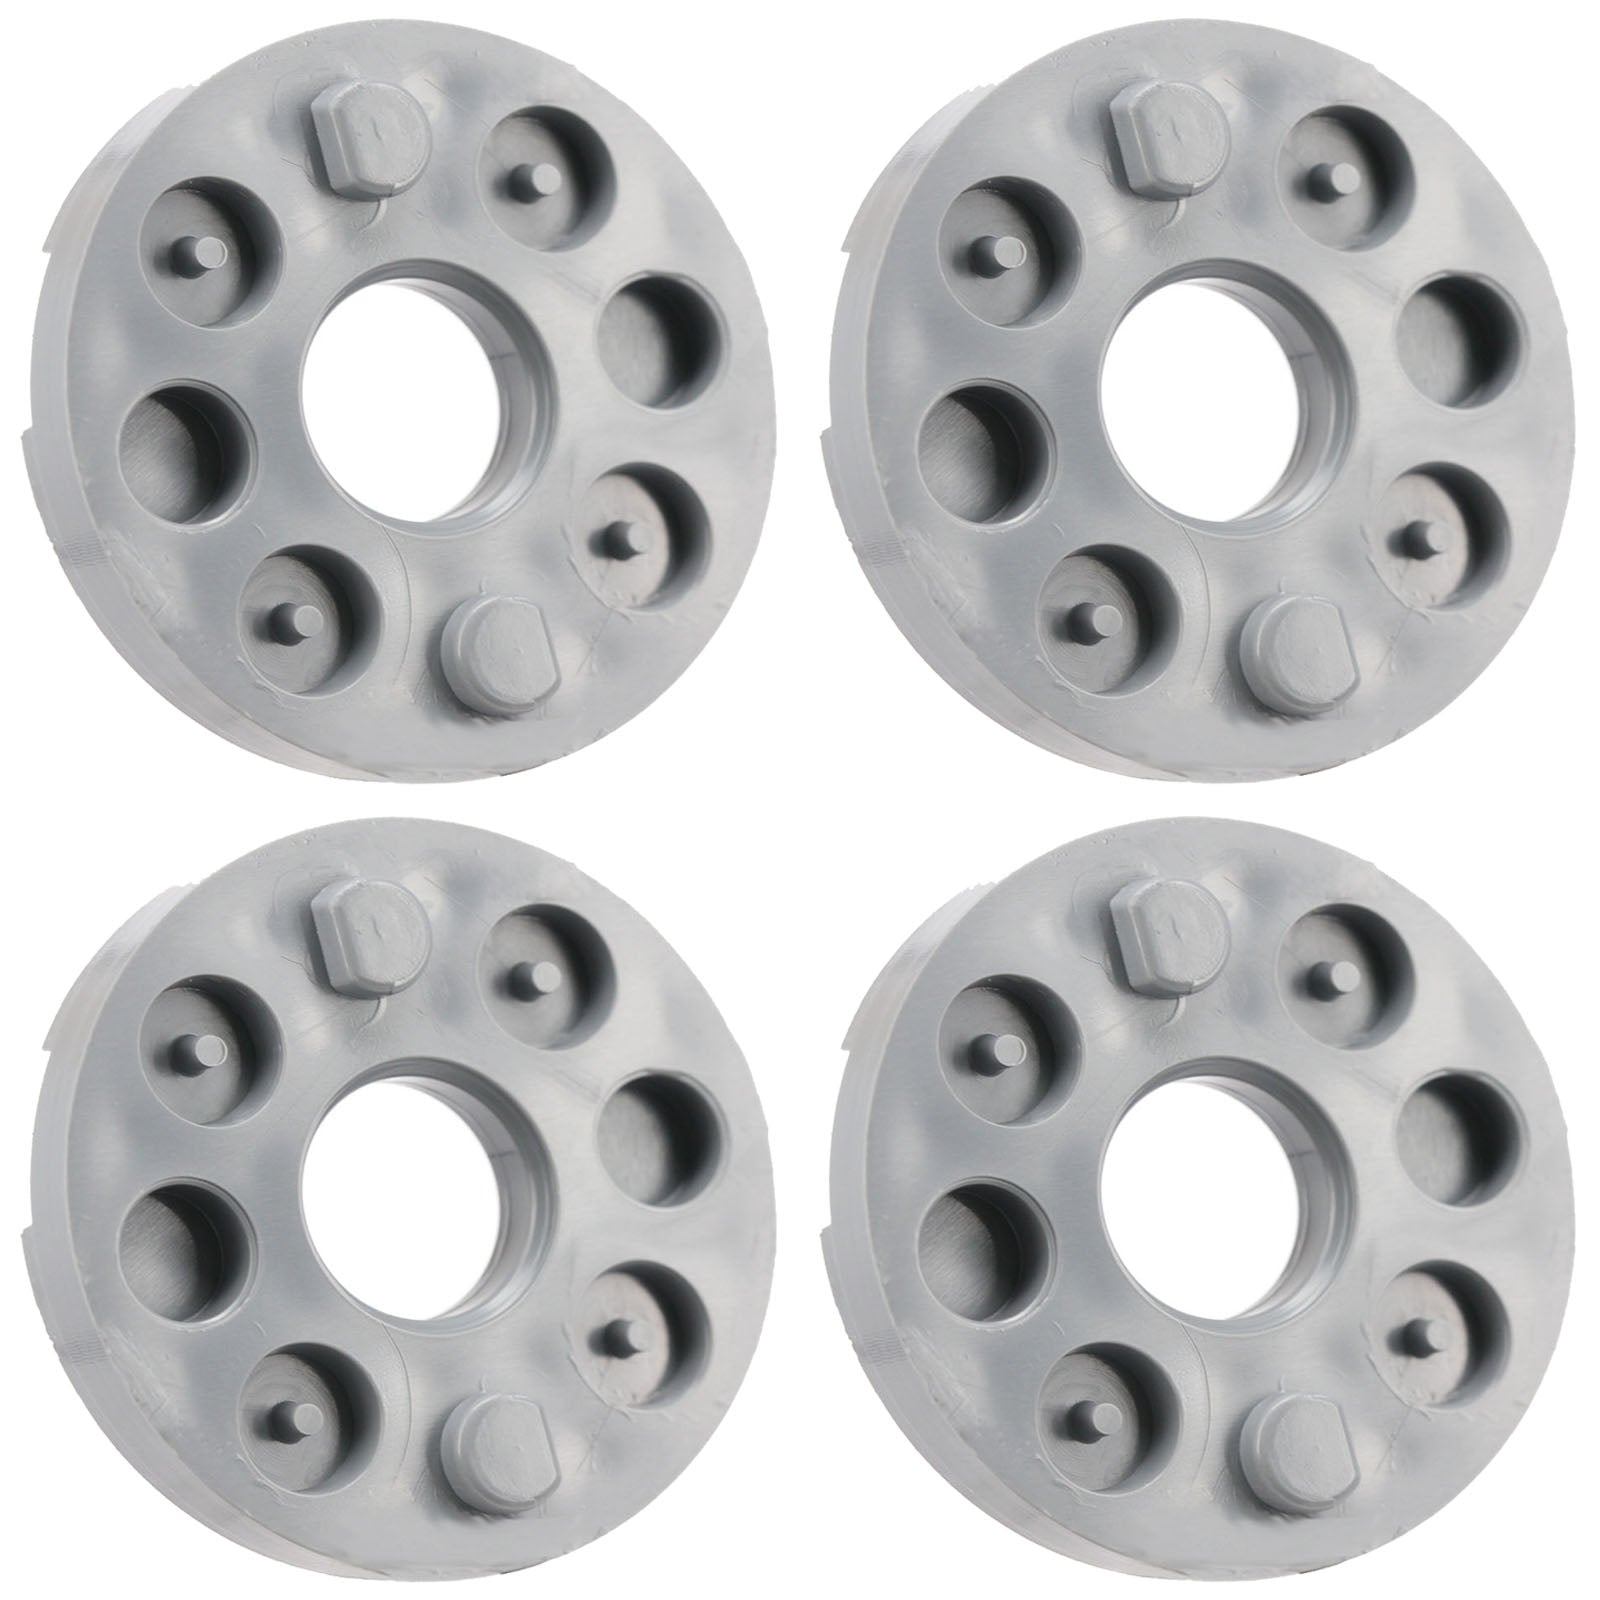 Blade Height Spacers for MAC ALLISTER MHLM1450 (2014) Lawnmower x 4